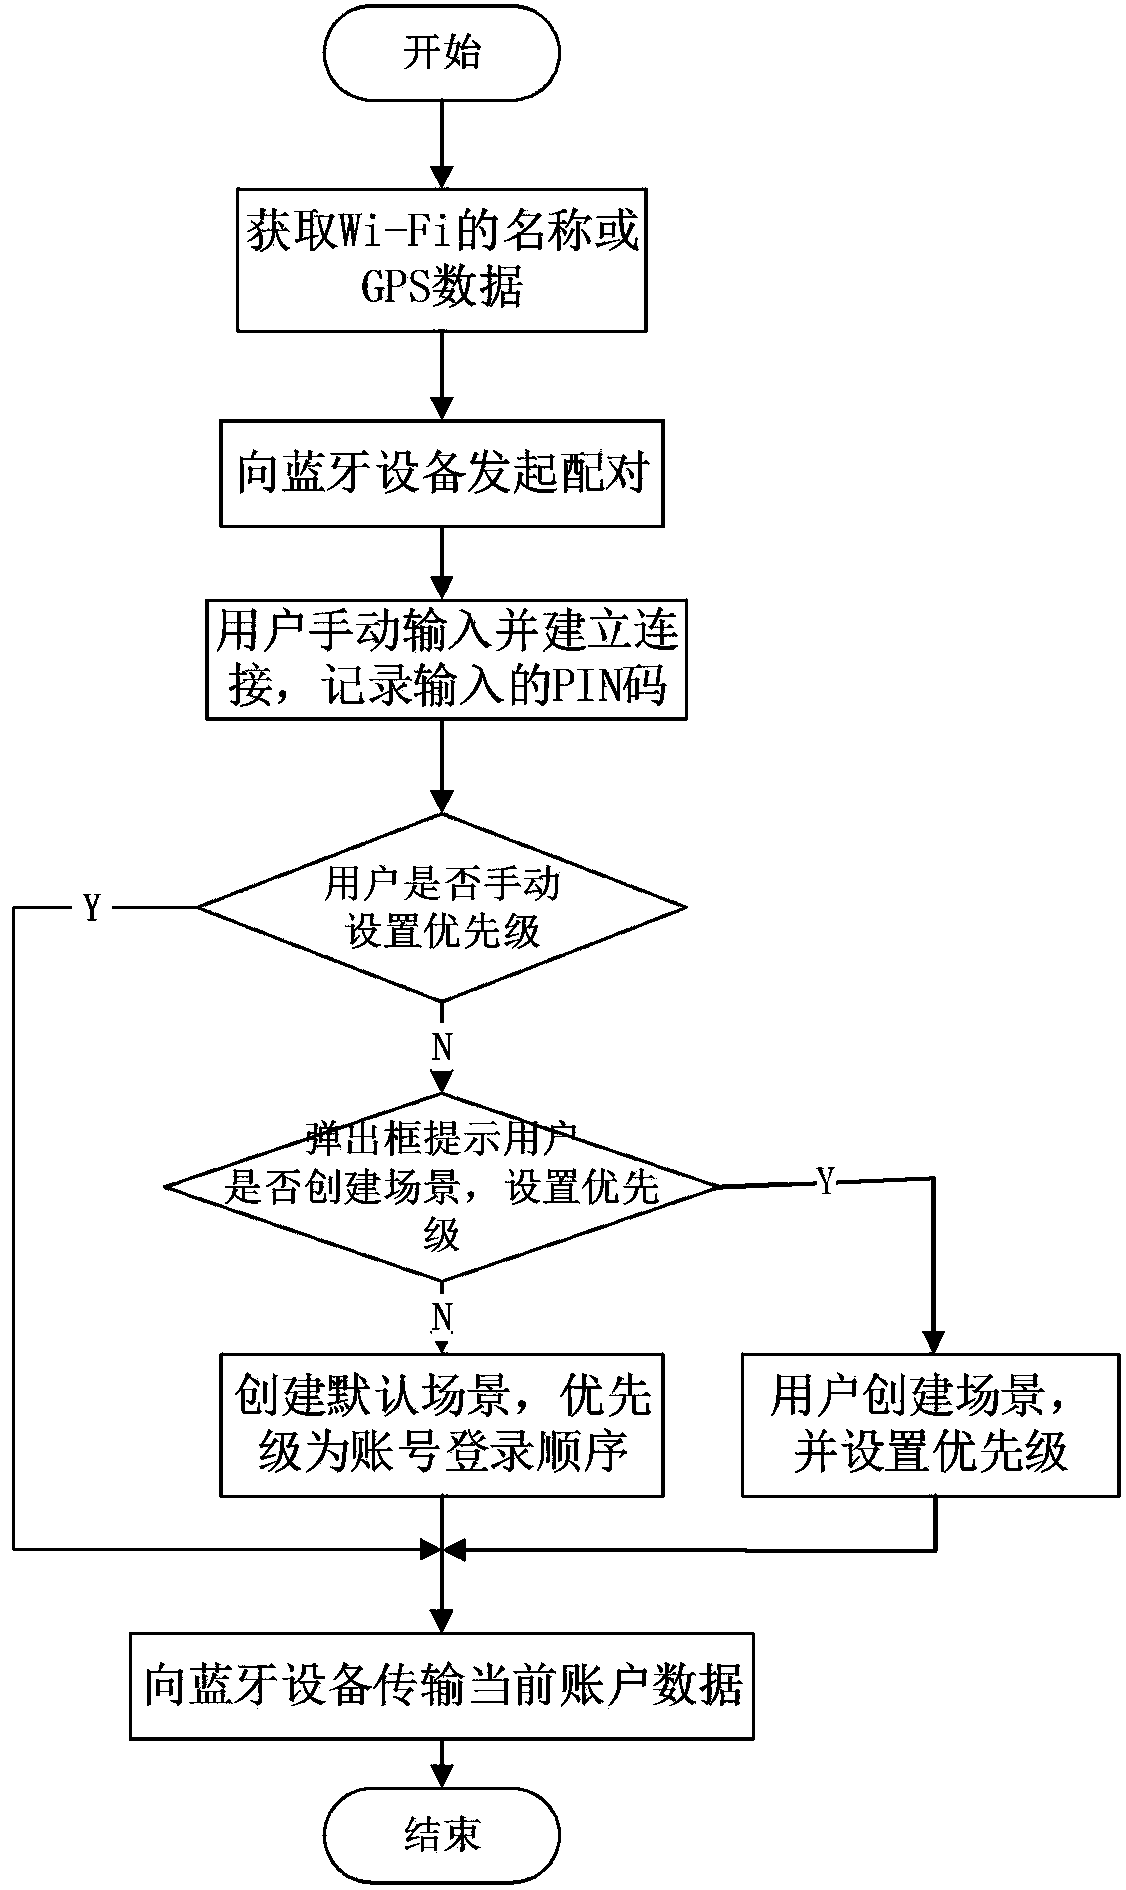 Bluetooth connection method and system